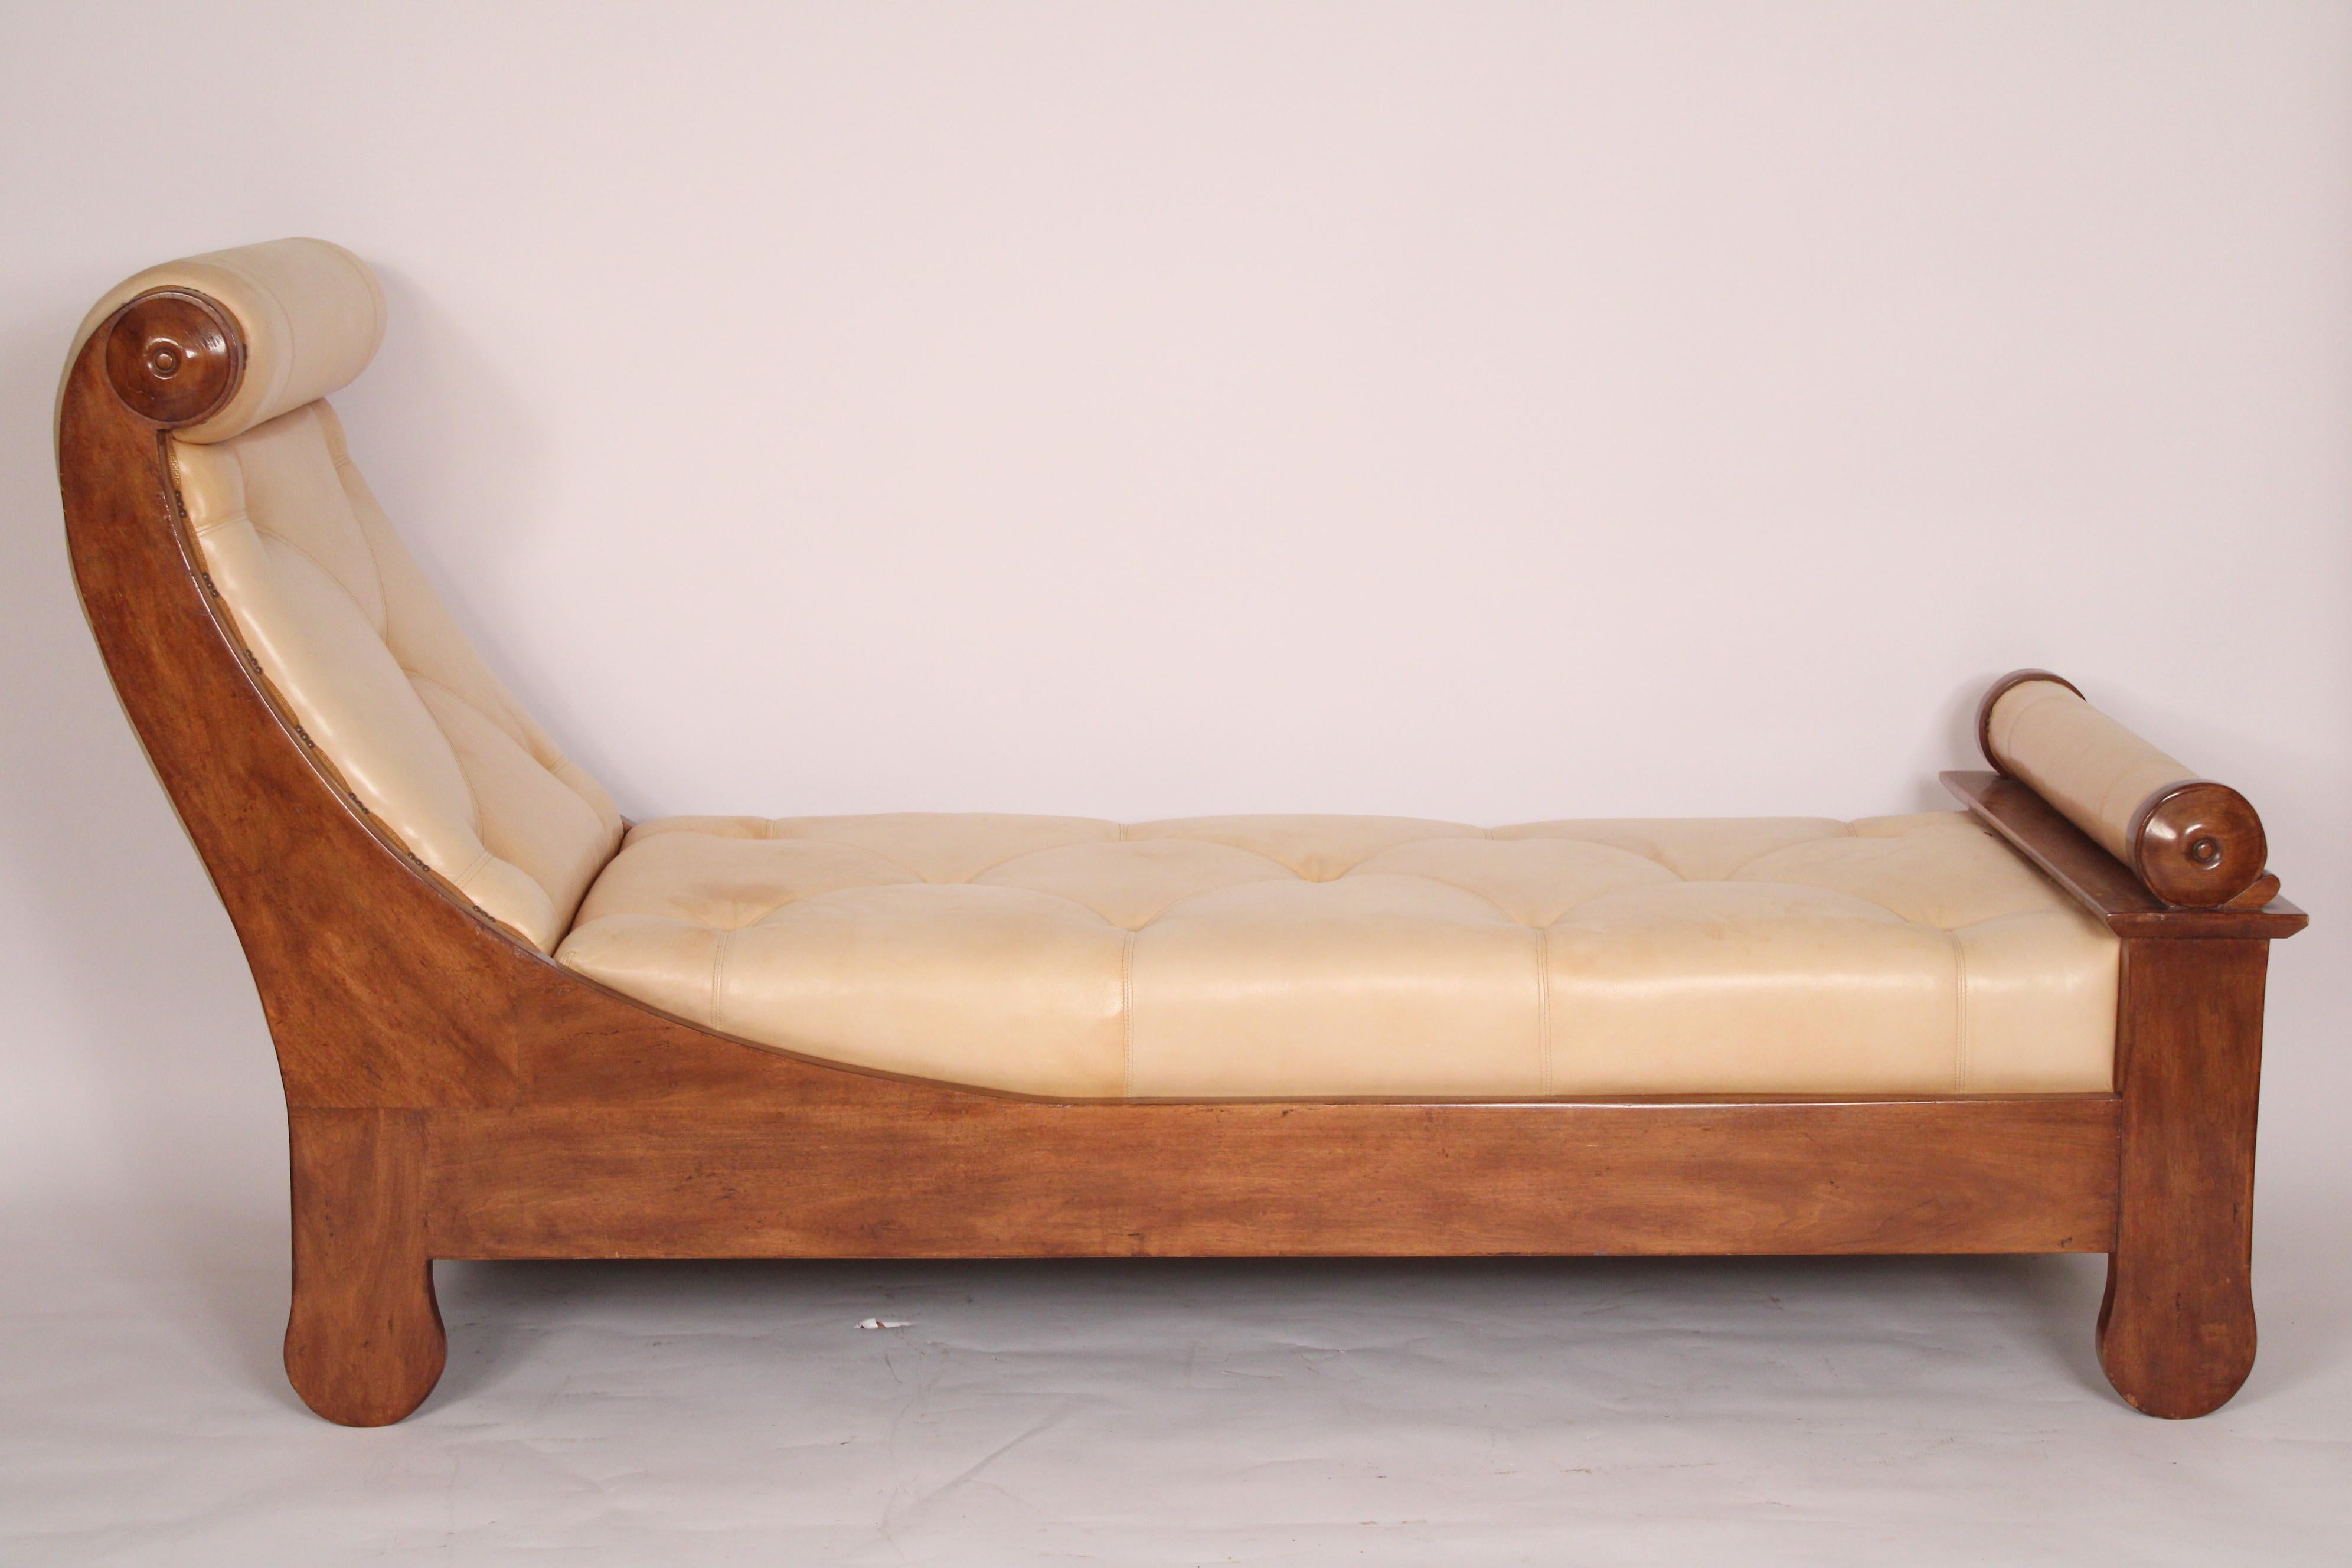 Louis Philippe style fruit wood day bed with leather upholstery, circa late 20th century. The leather is very soft. The wood has a walnut color.